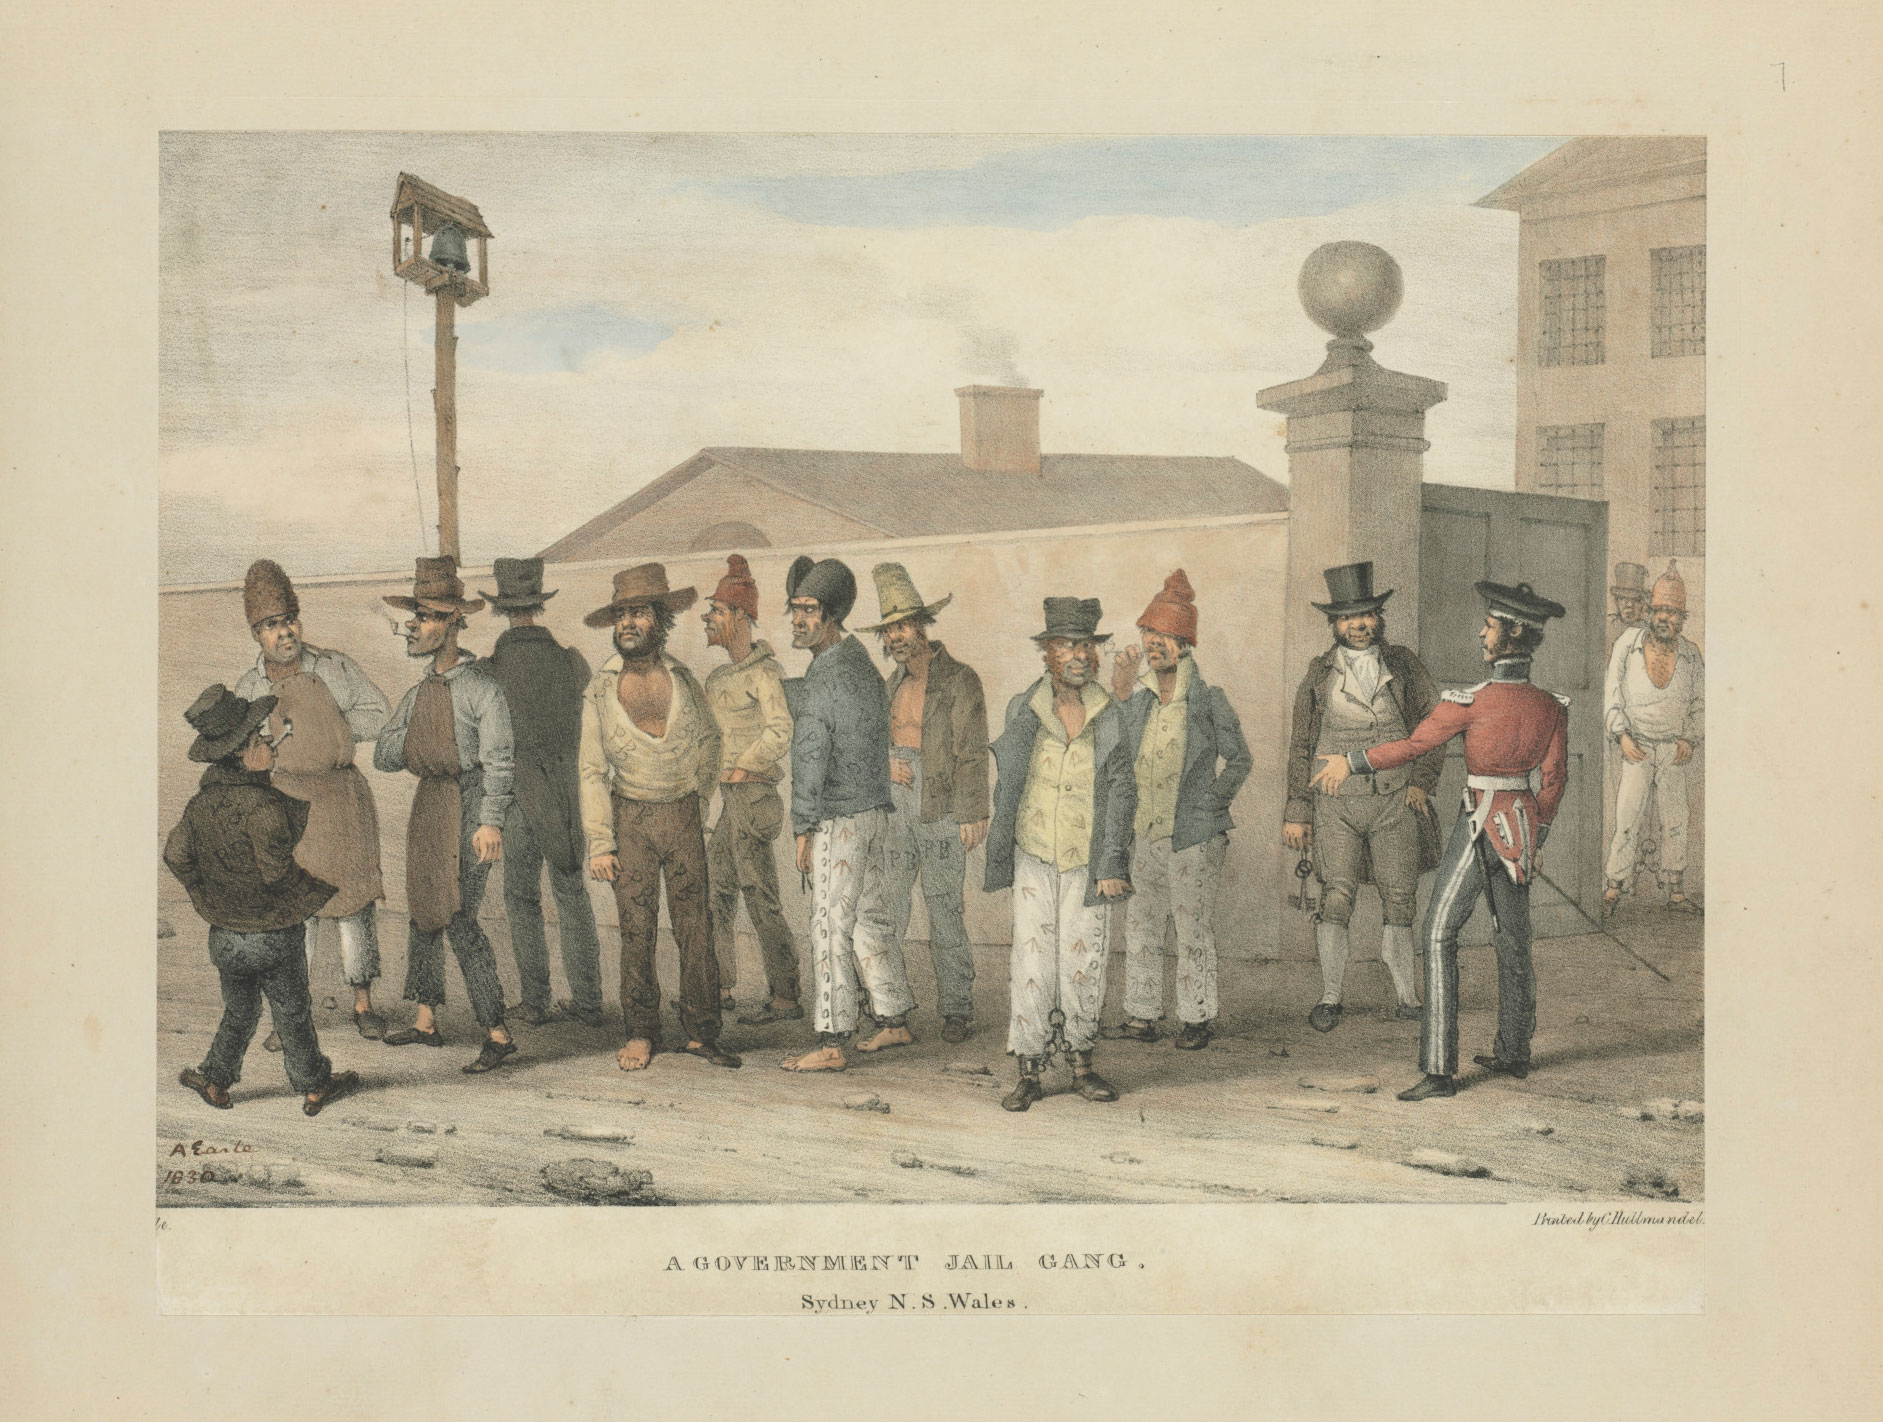 A Government Jail Gang, New South Wales, by Augustus Earle, 1830